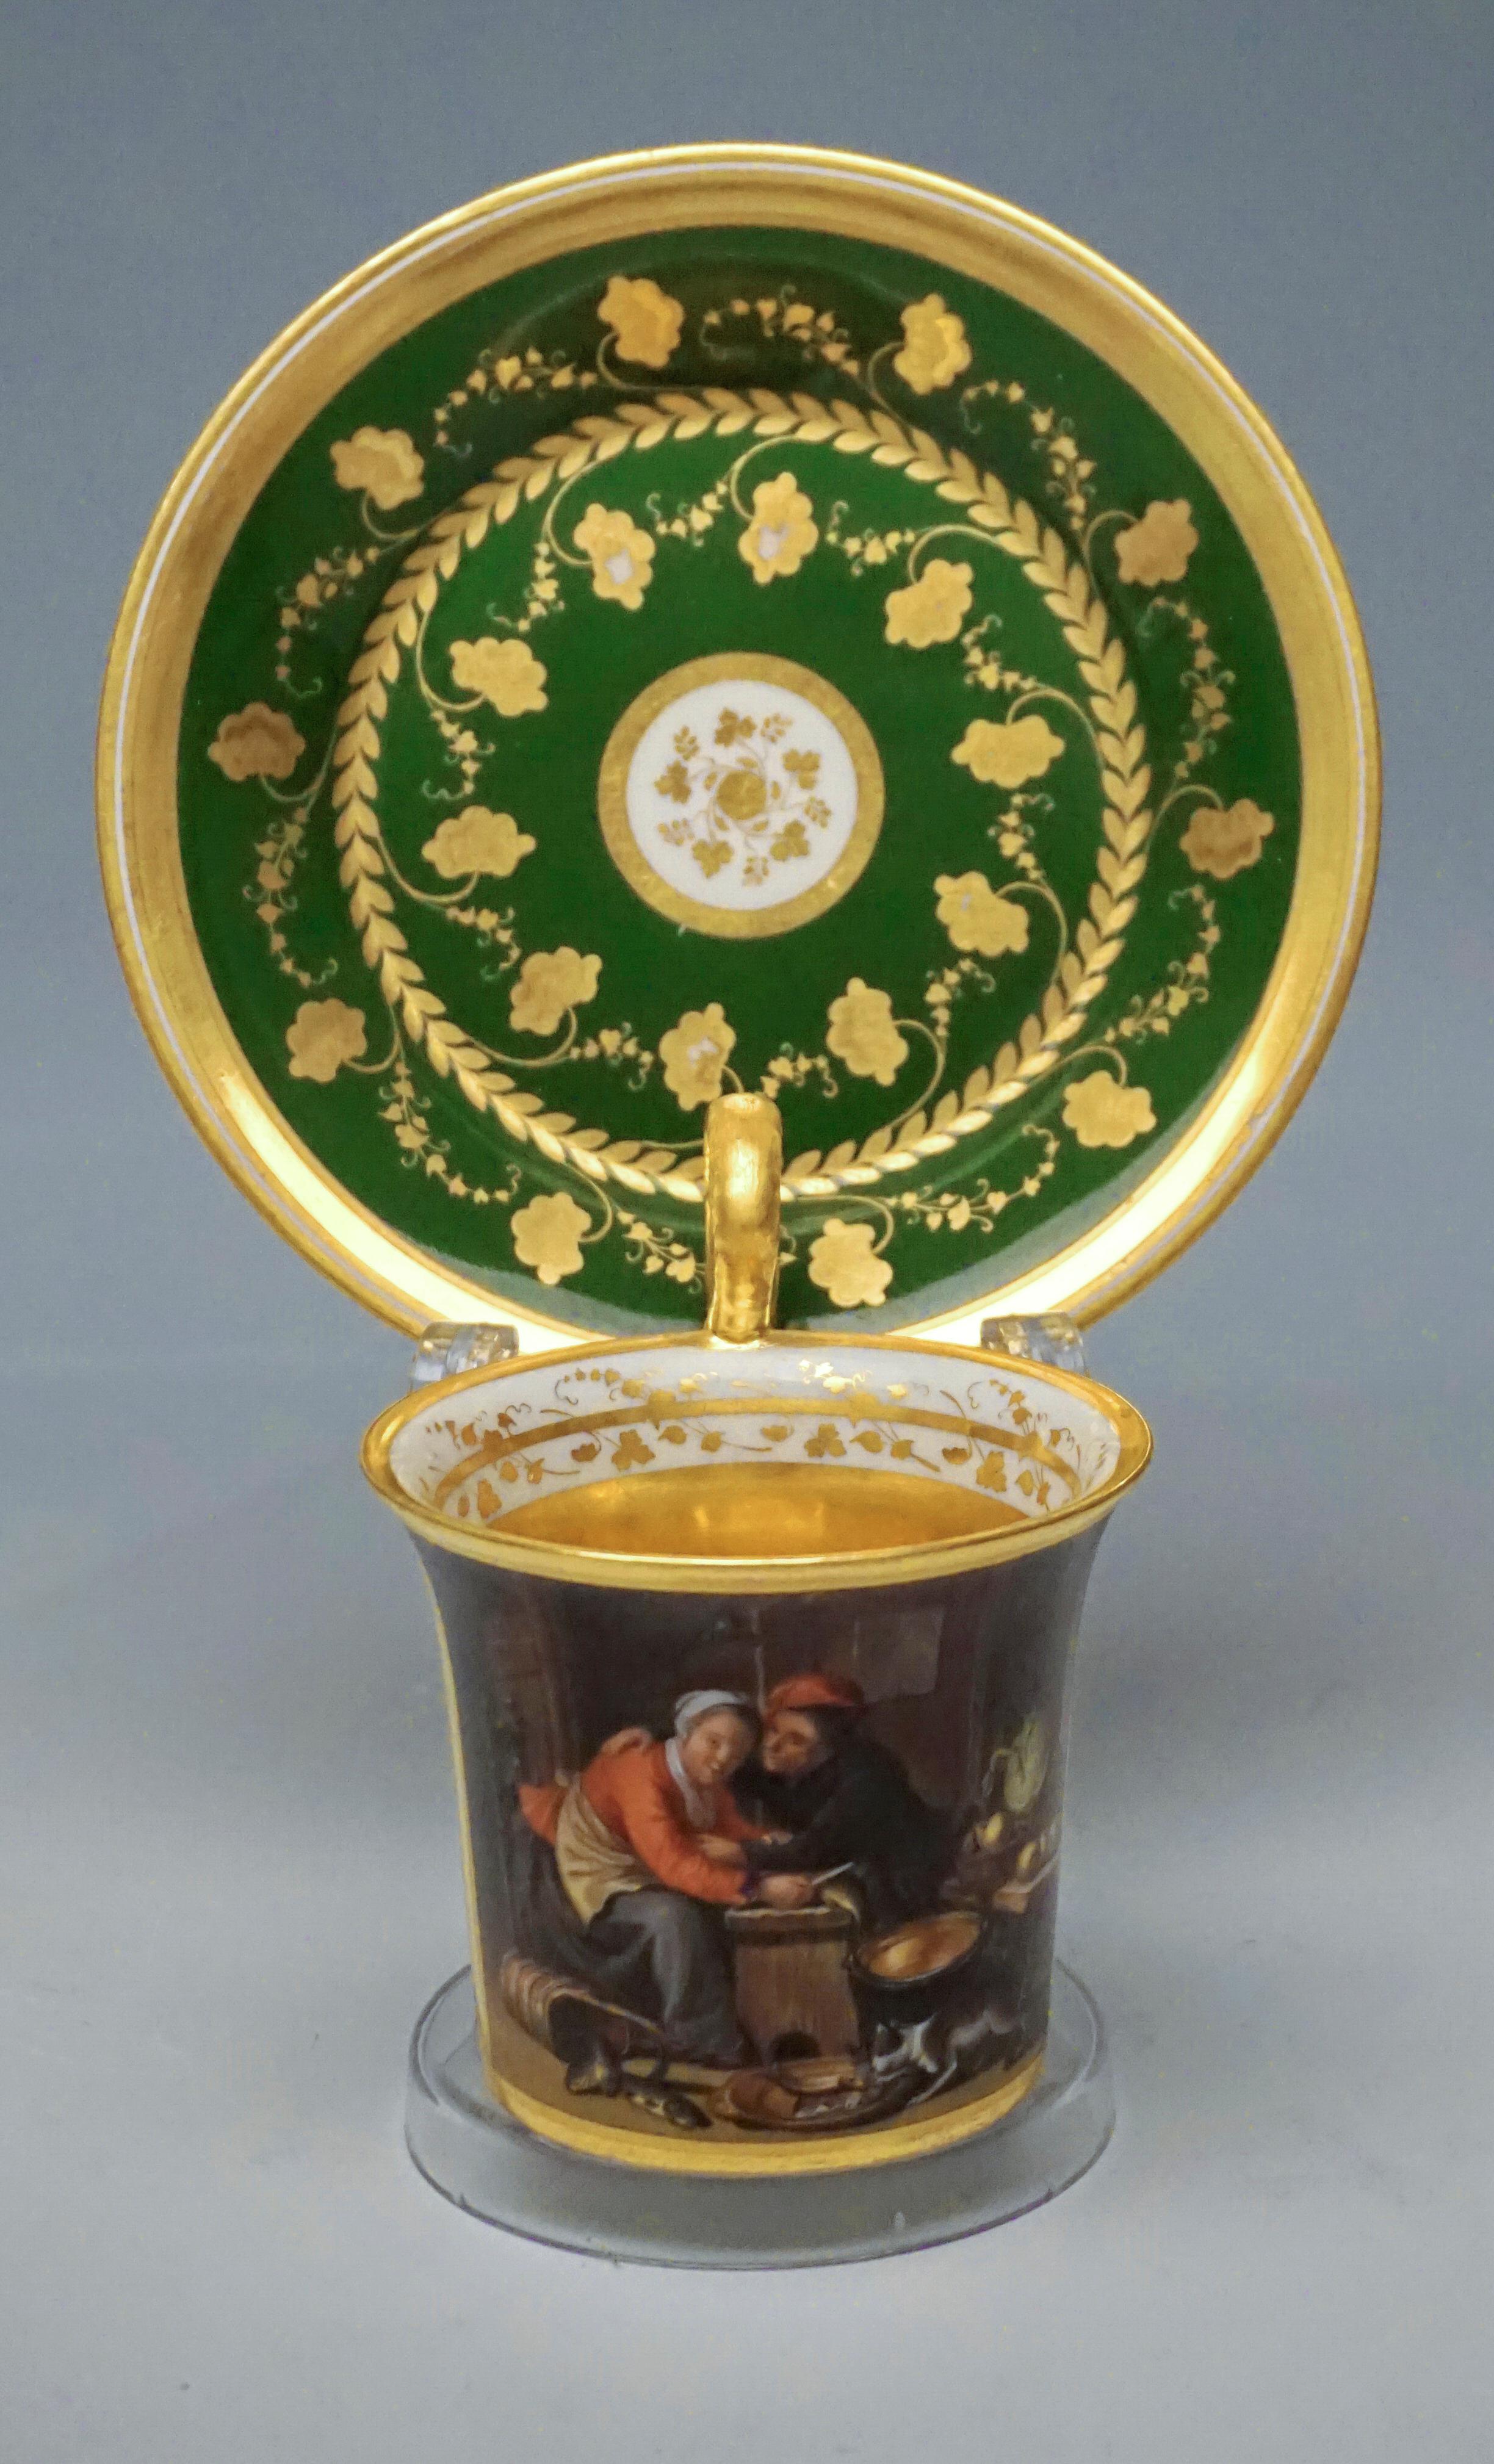 Legantly painted Imperial Viennese cup with Genre motive

Manufactory: 'Alt Wien' Old Imperial Austrian Porcelain Manufactory Vienna
Date of manufacture: 1828
Technique: white handmade porcelain, painted, glossy finish, gold